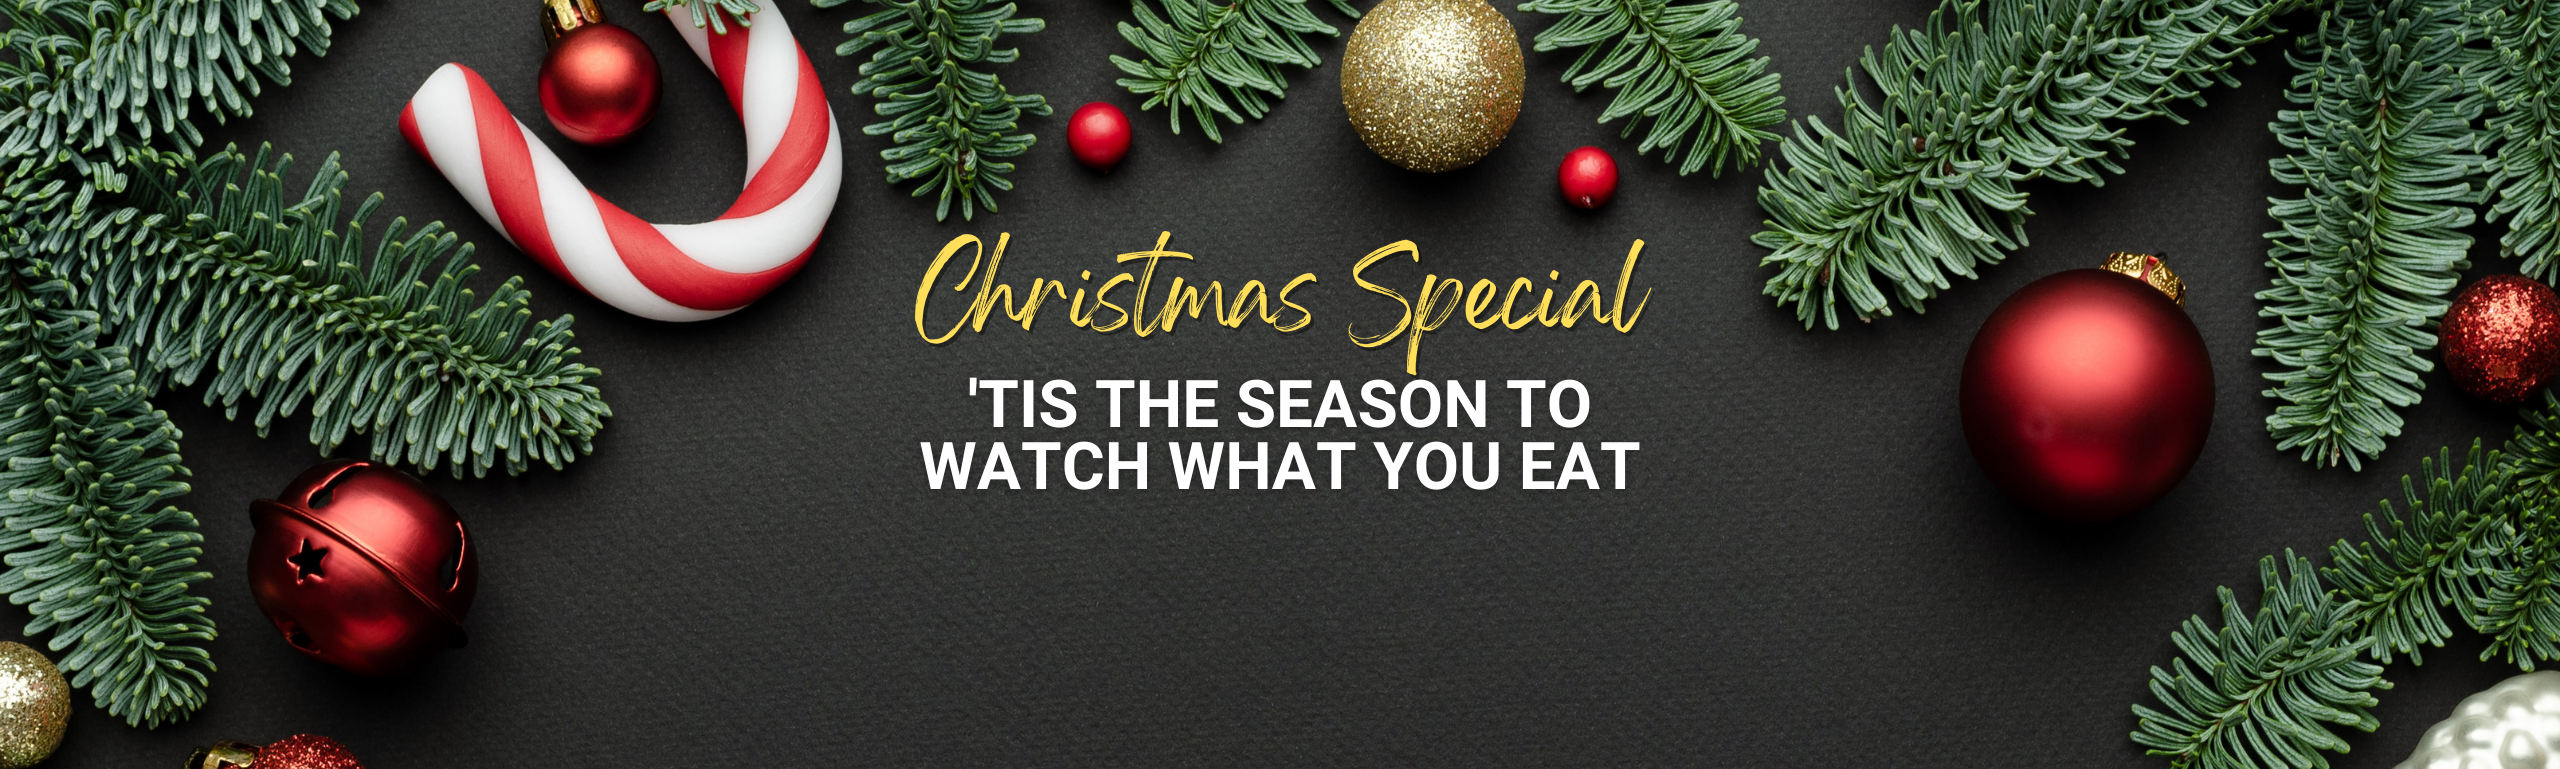 eat well during christmas without compromising your health